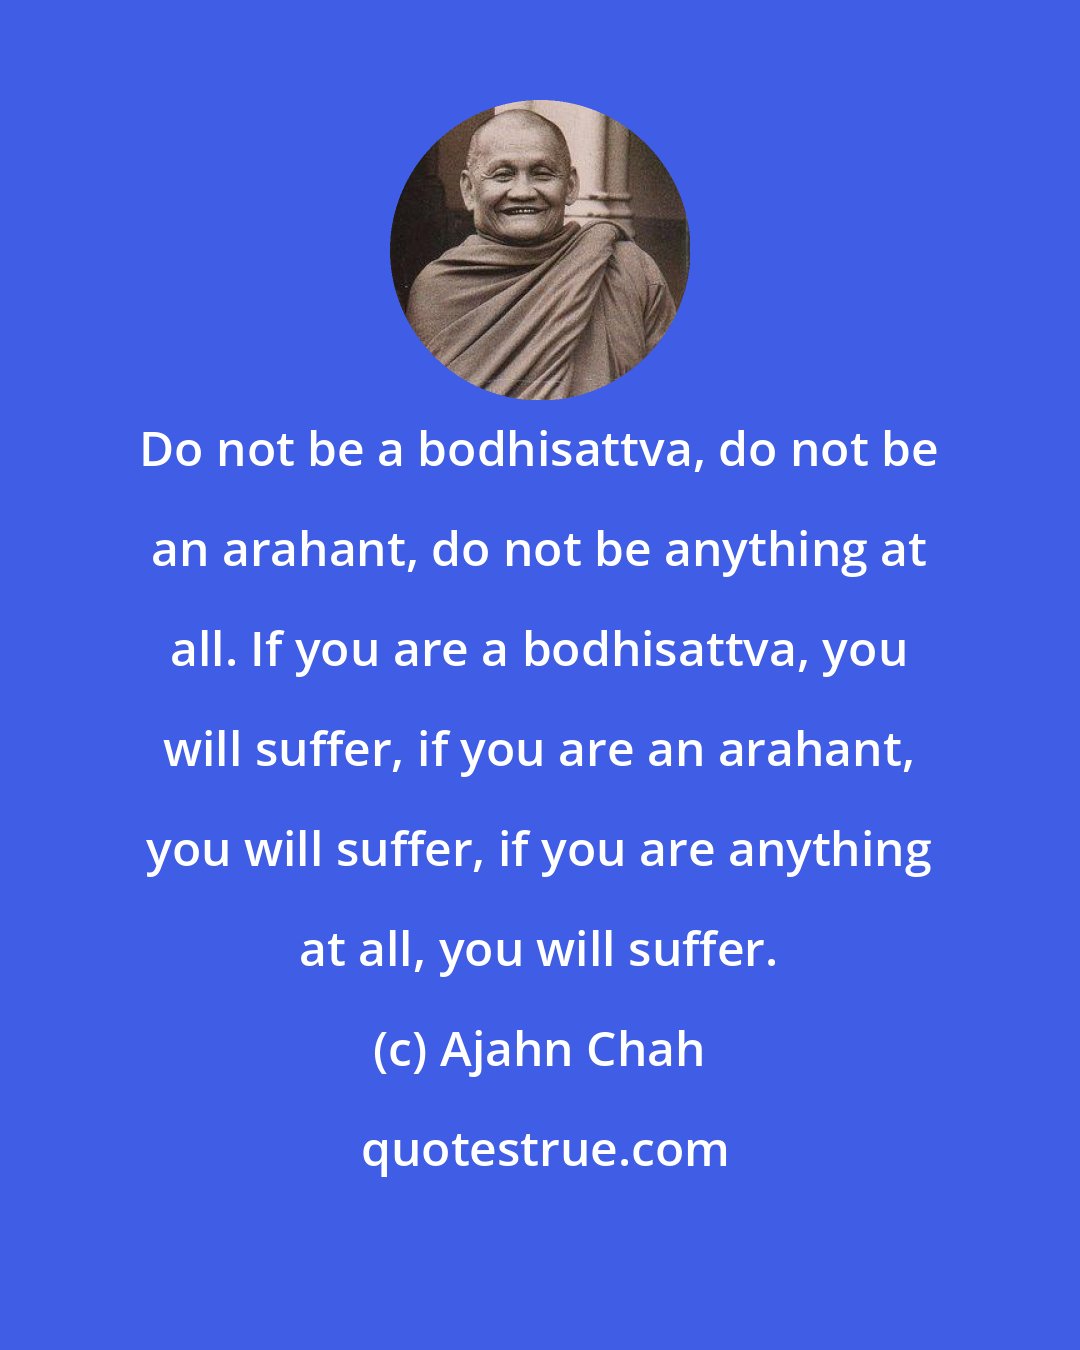 Ajahn Chah: Do not be a bodhisattva, do not be an arahant, do not be anything at all. If you are a bodhisattva, you will suffer, if you are an arahant, you will suffer, if you are anything at all, you will suffer.